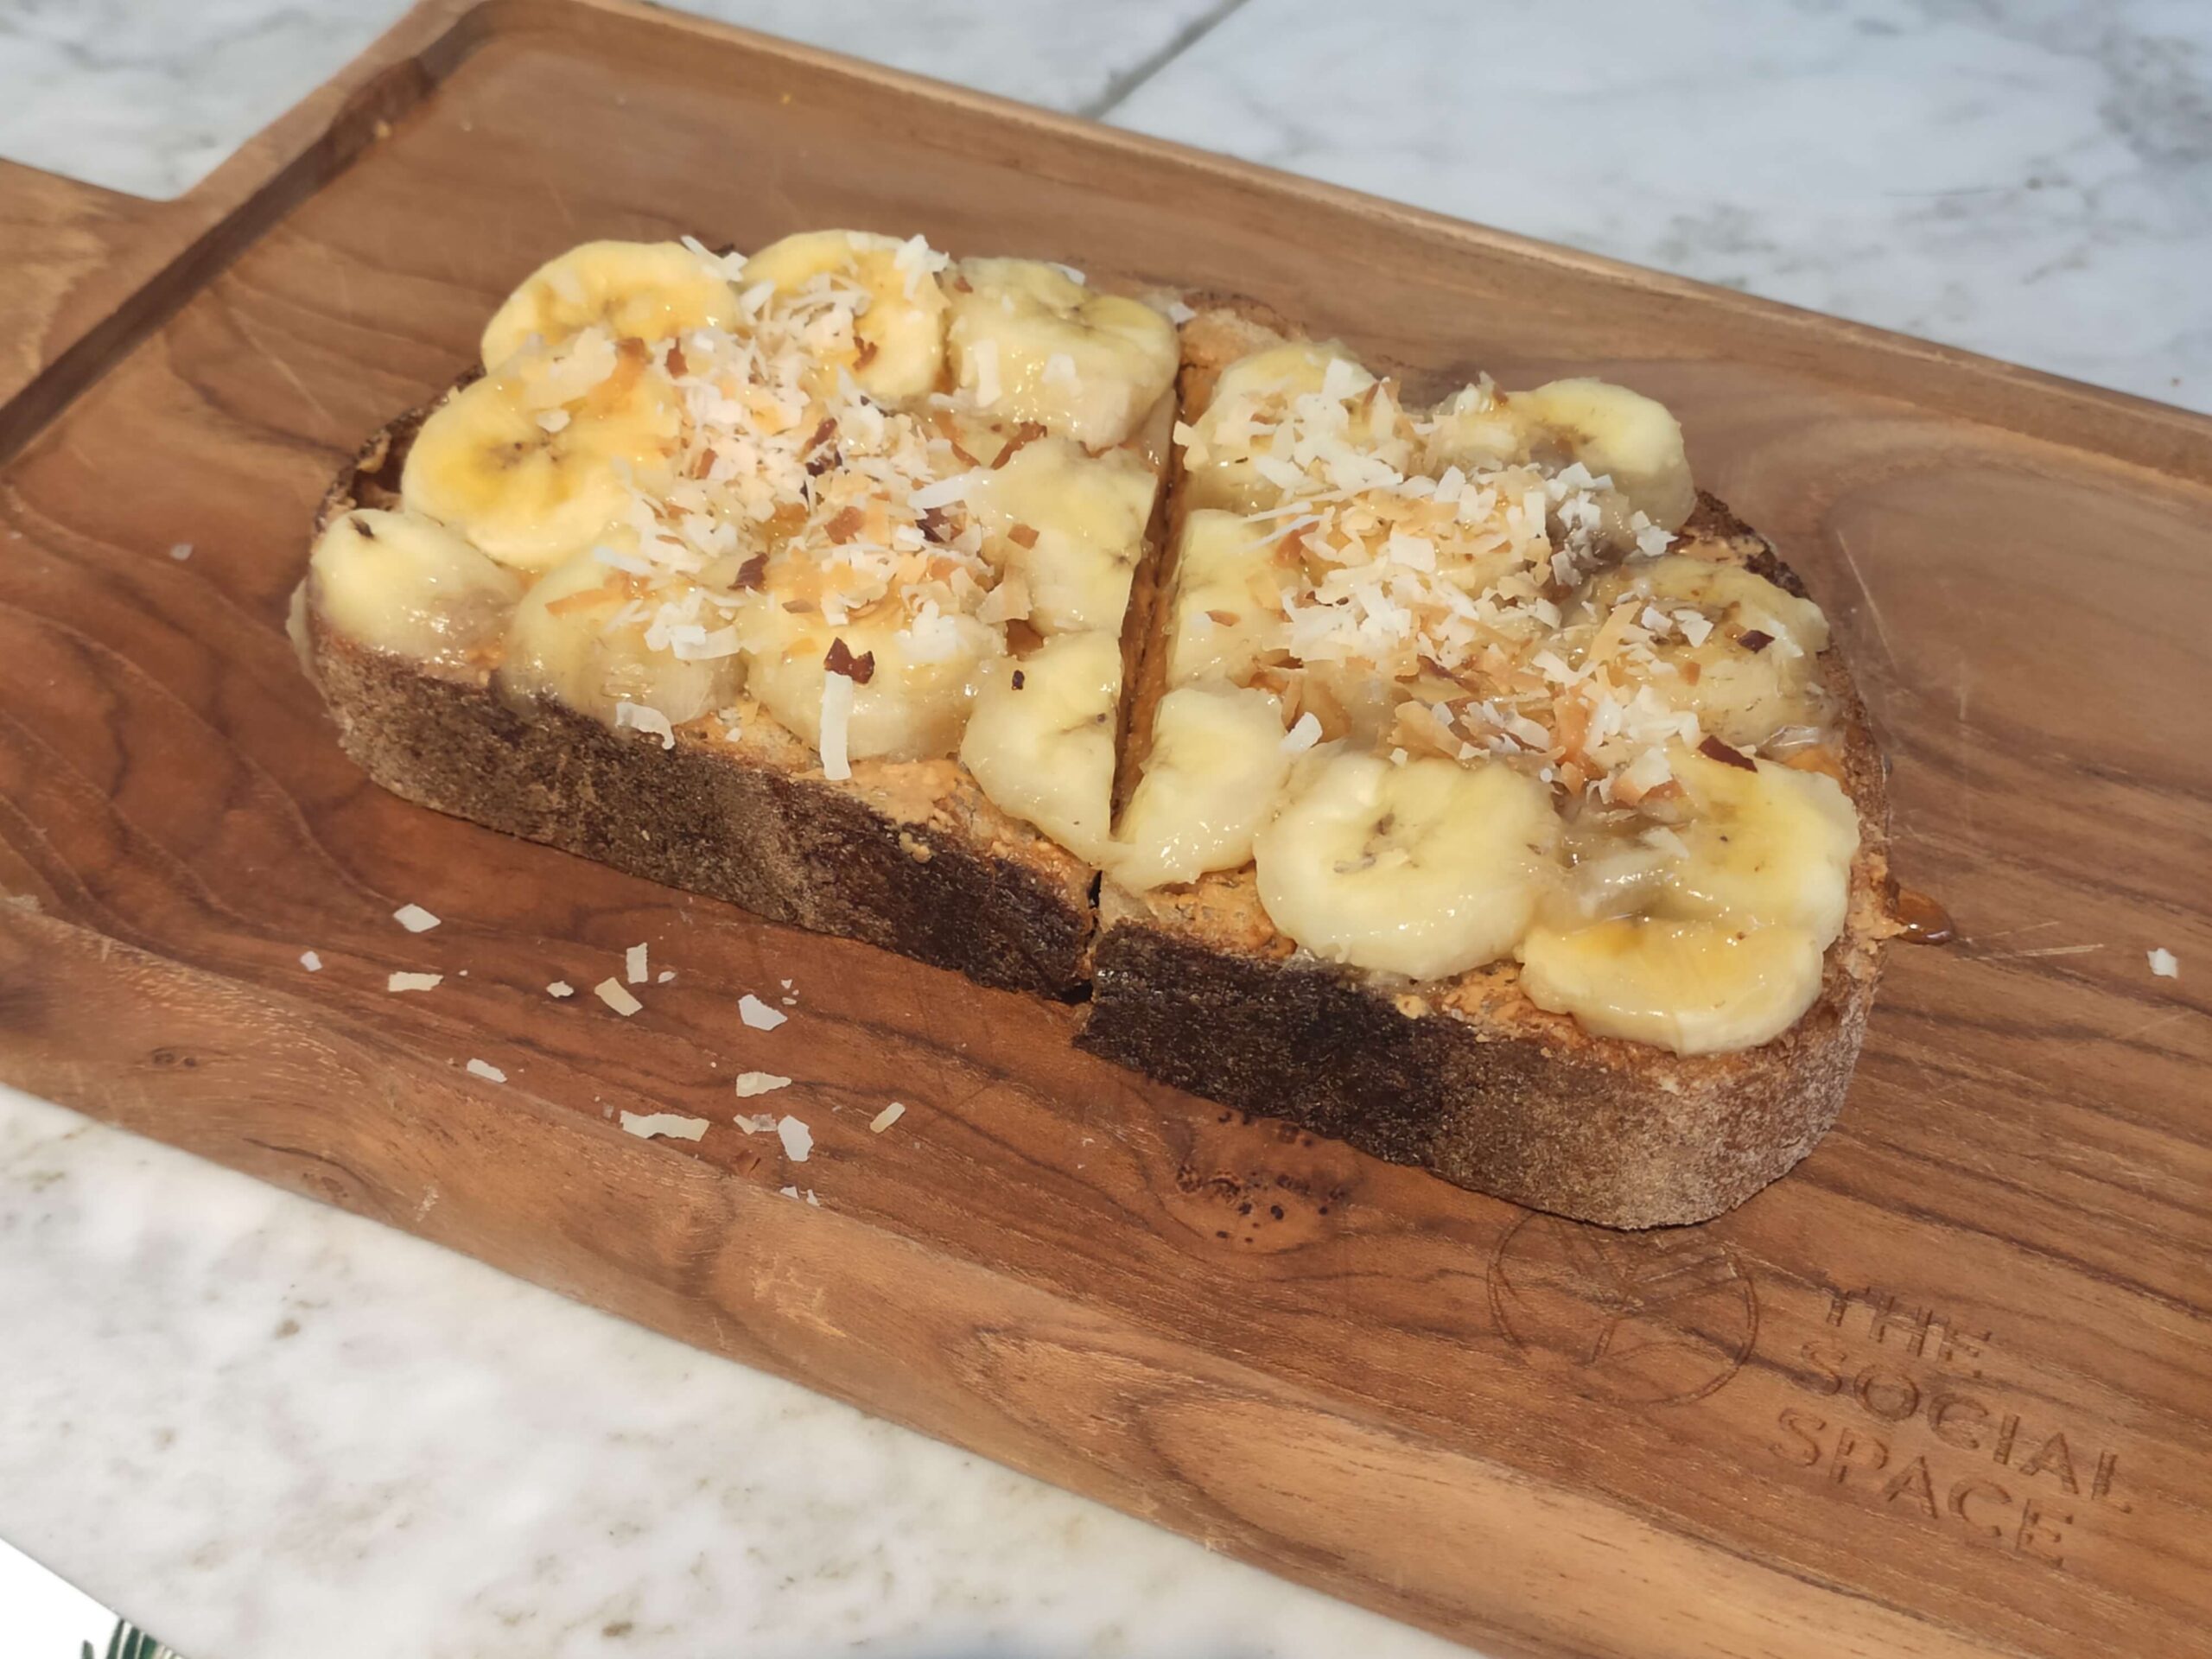 The Social Space: Toasted Banana Peanut Butter